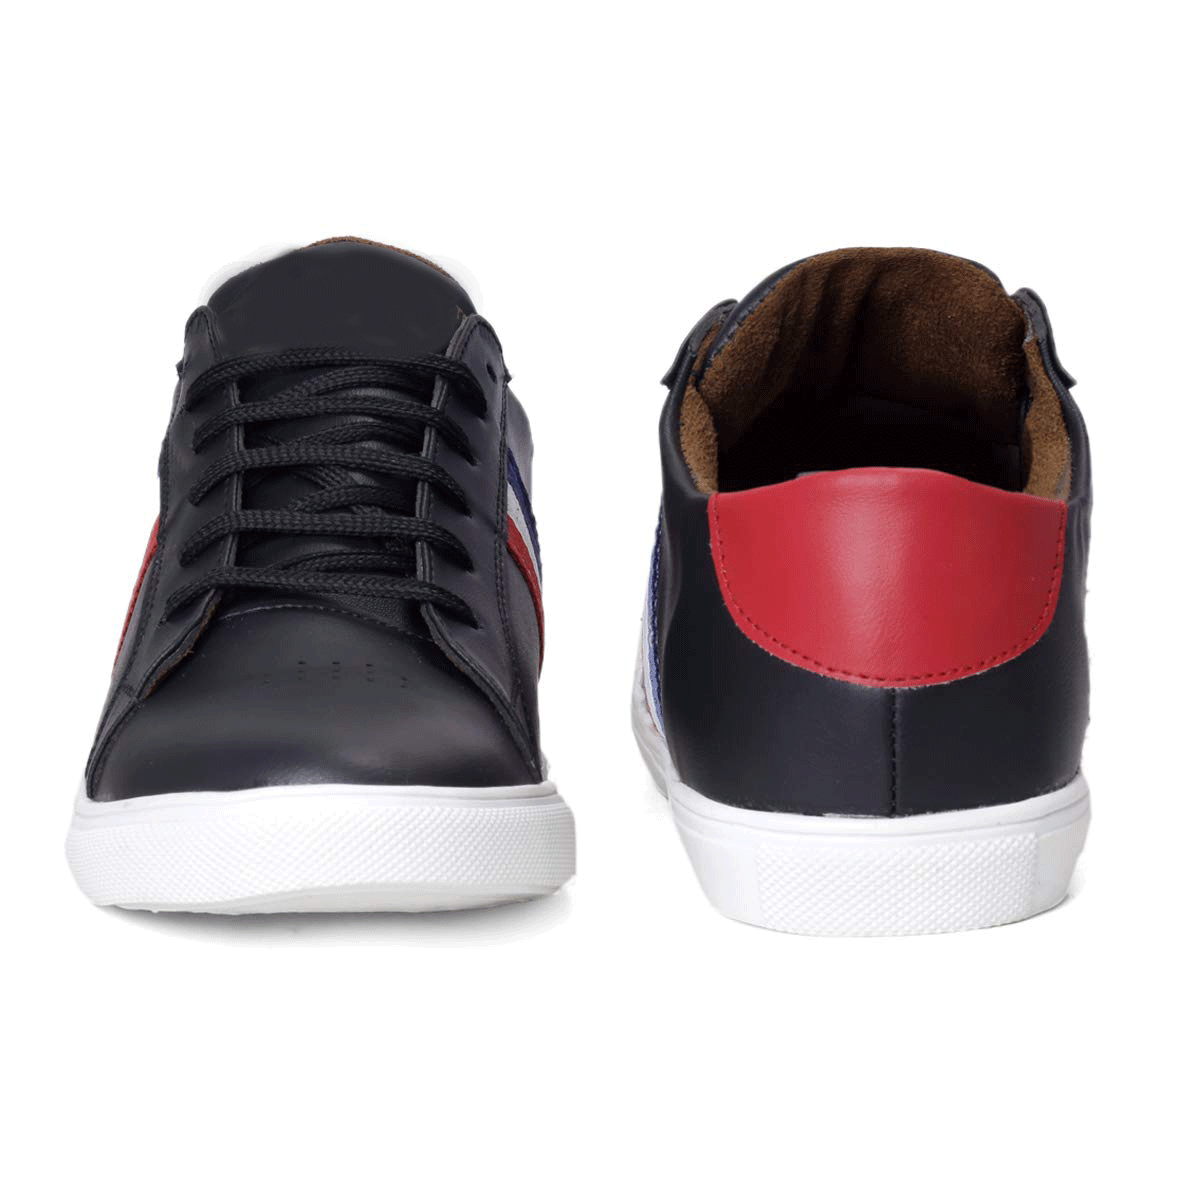 Stylish Fashionable Casual Lace-up Sneakers For Men's-Unique and Classy